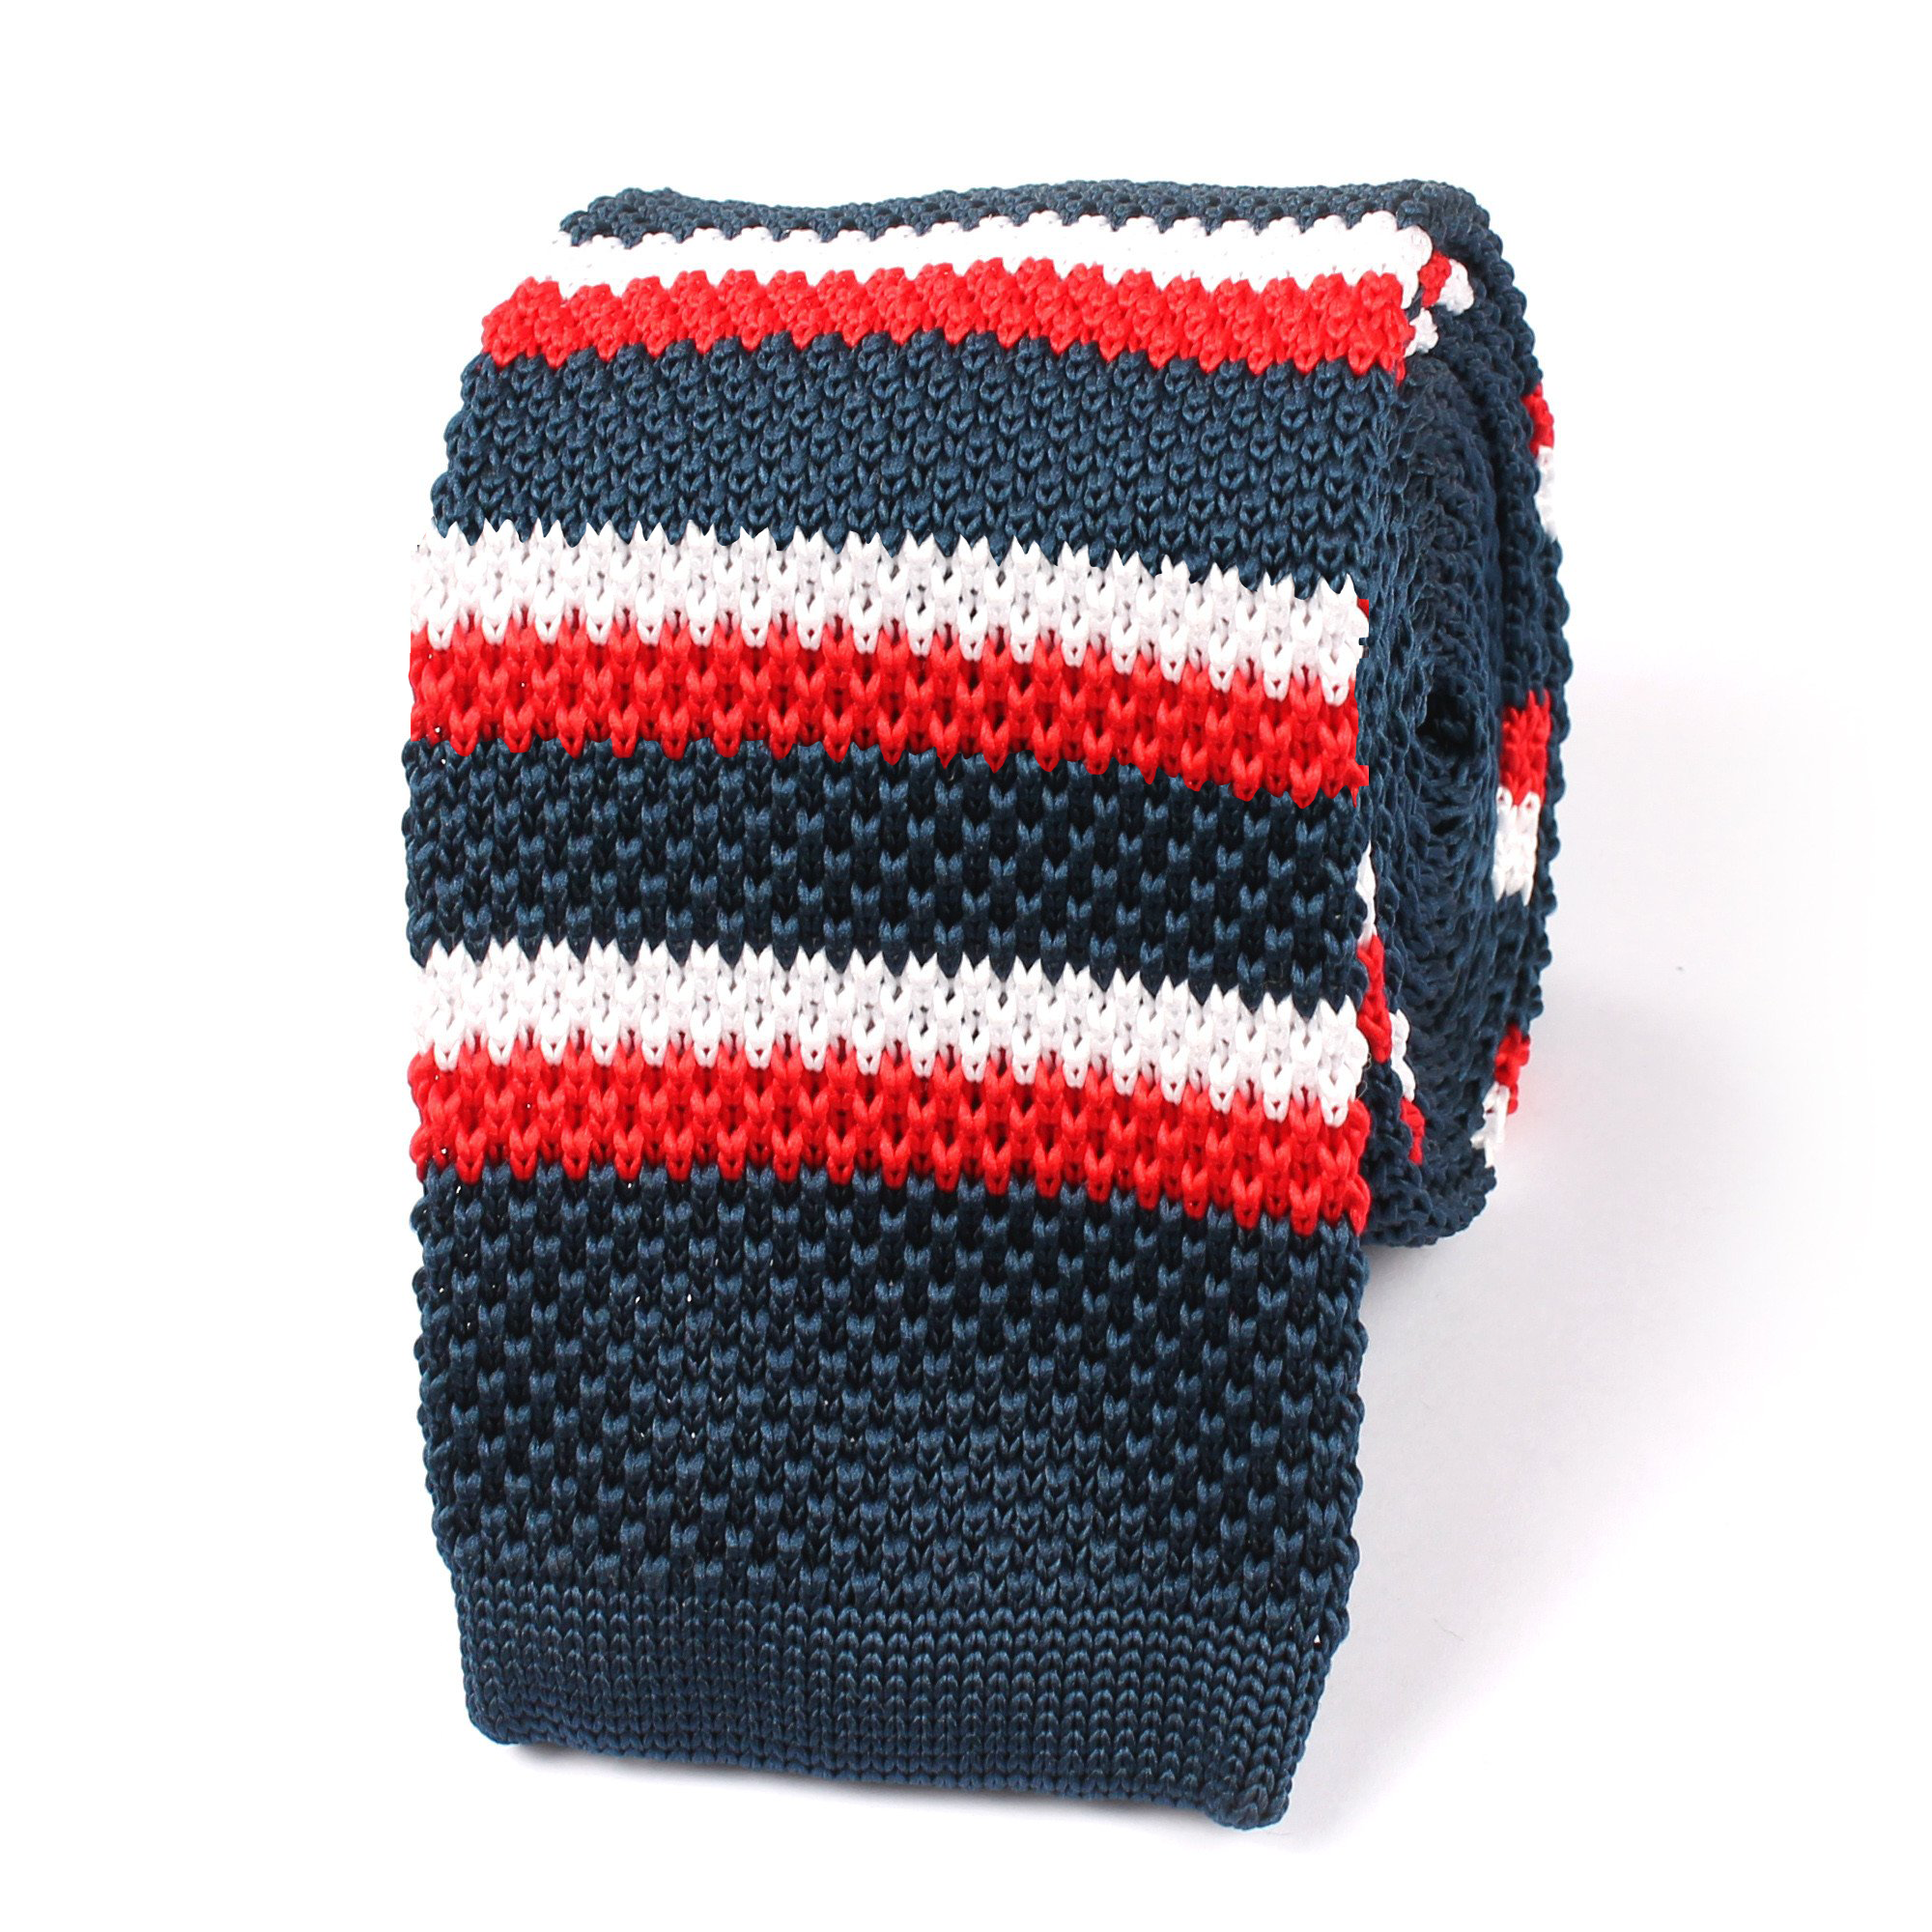 The Navy Blue American Knitted Tie with Red & White Stripes